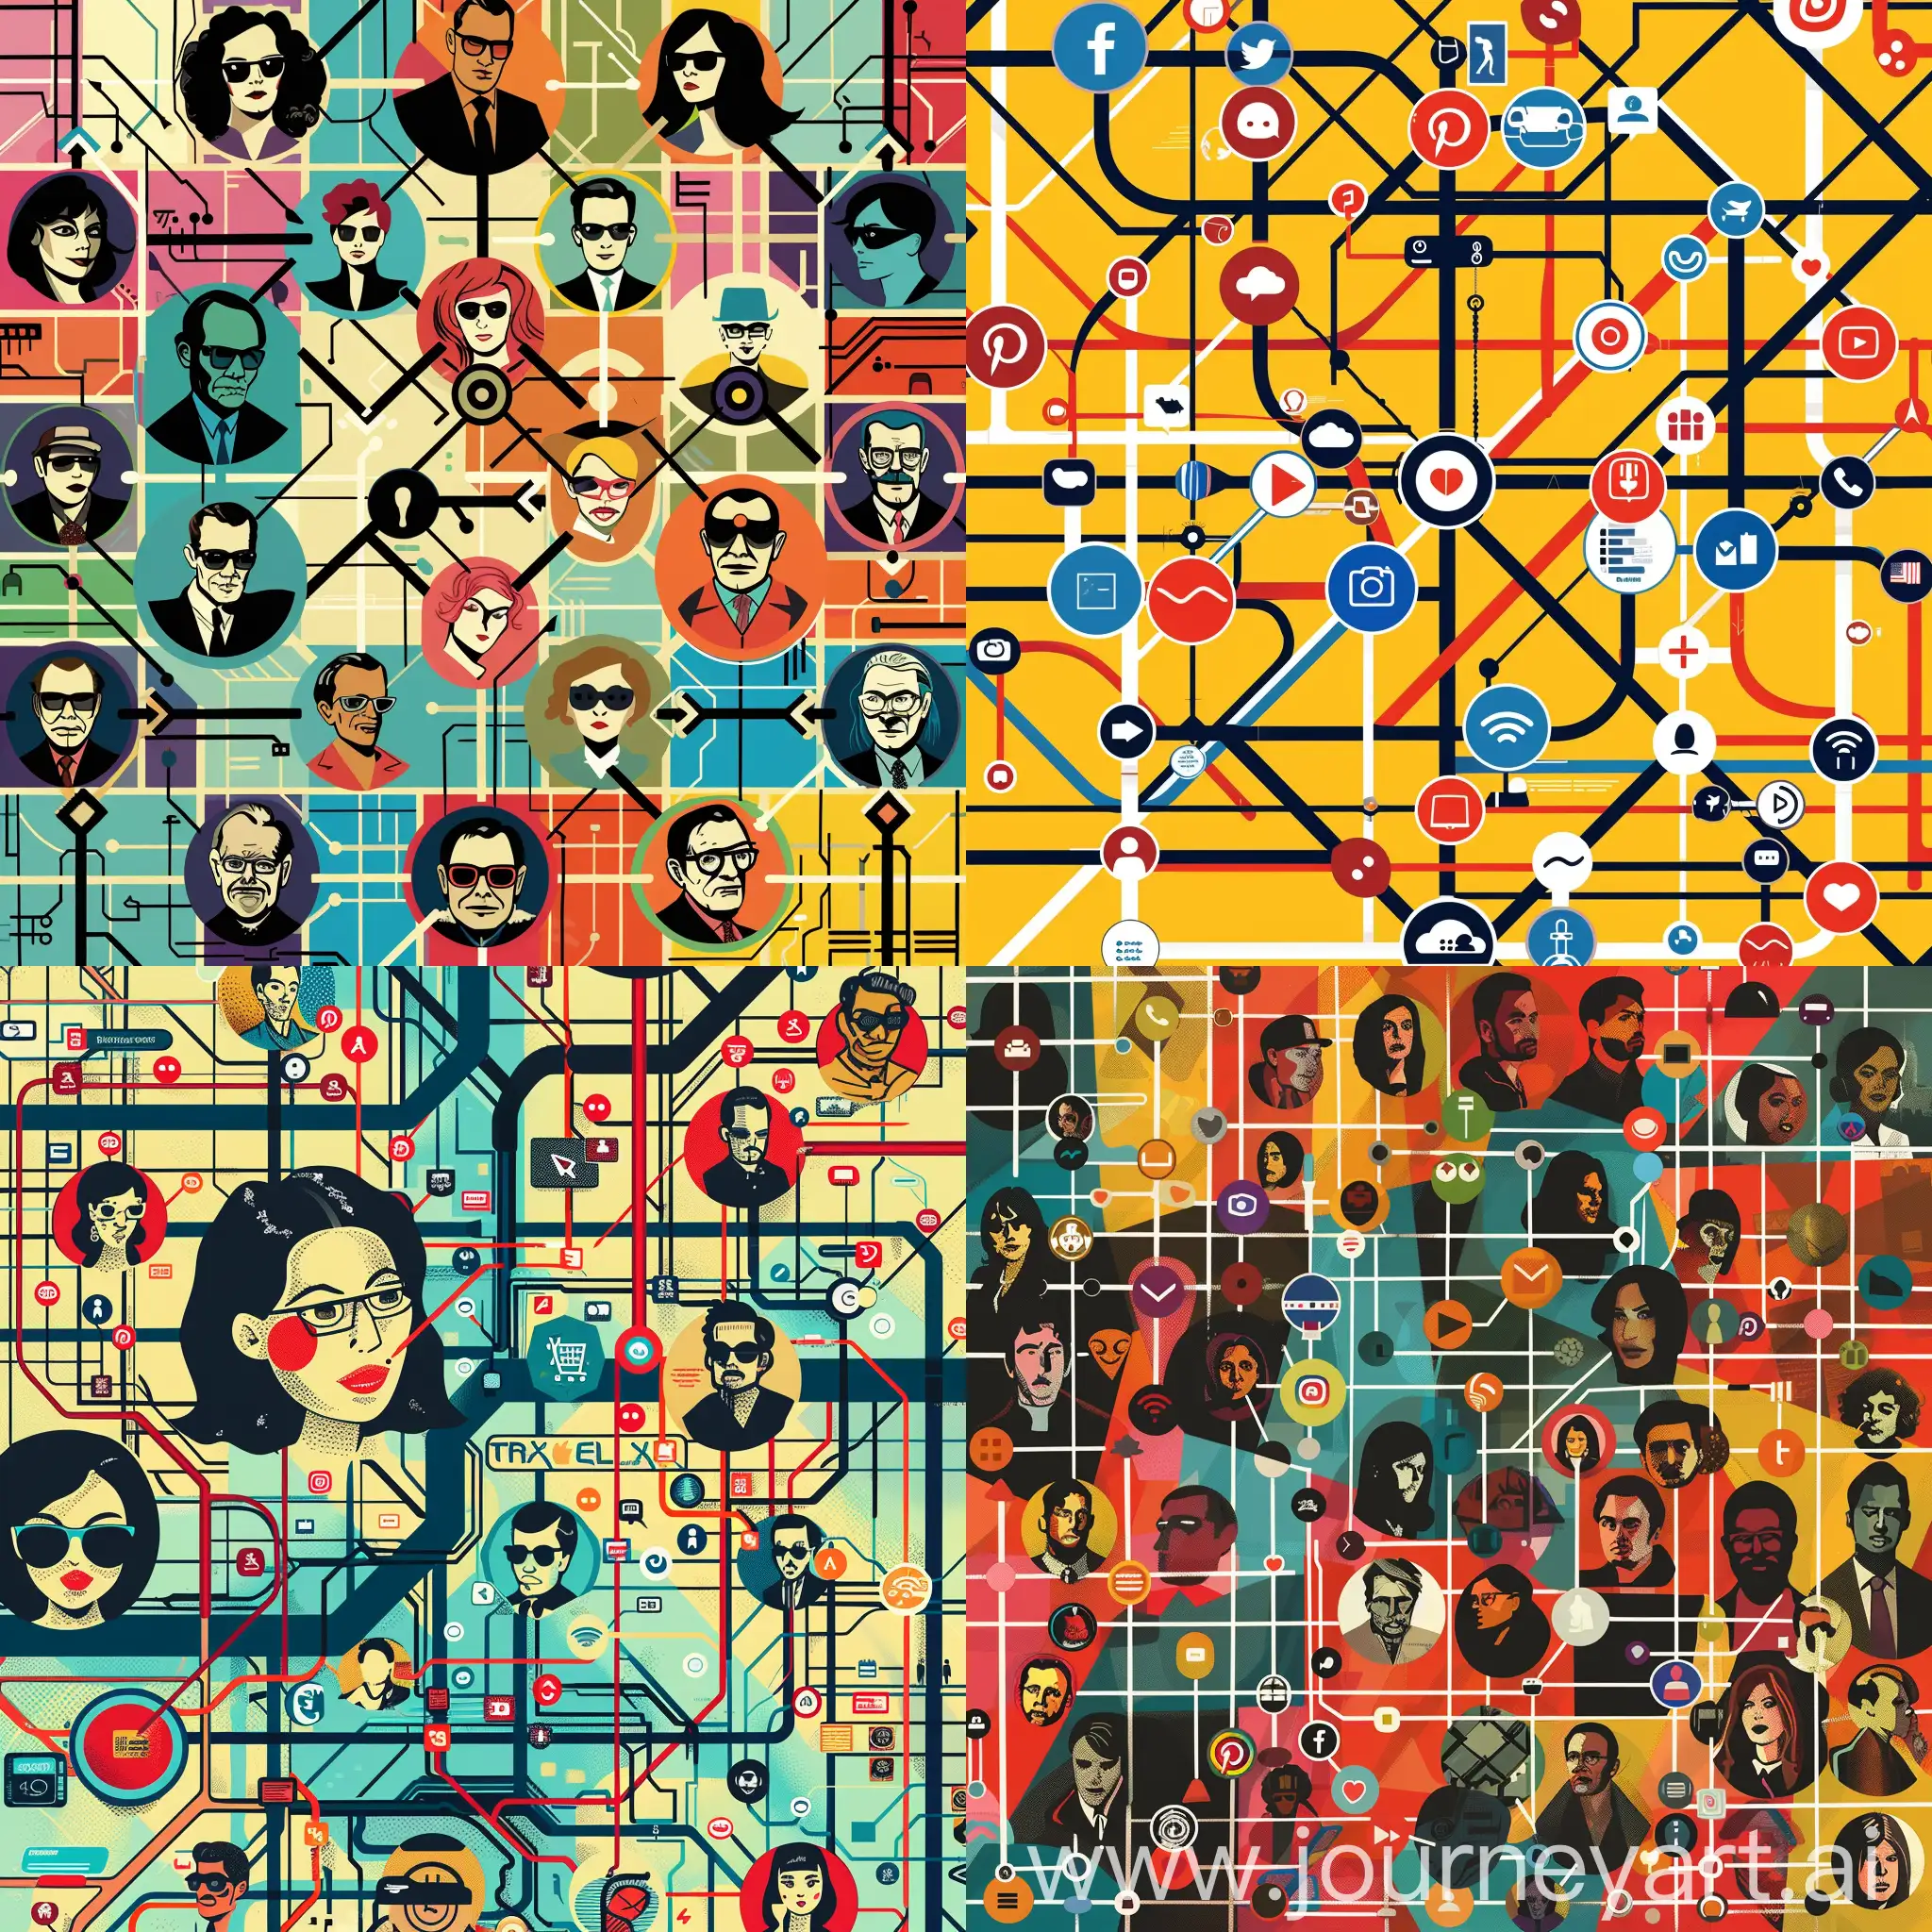 Pop-Art-Style-Connections-Social-Media-Icons-Illustrated-in-Tarantinoesque-Metro-Map